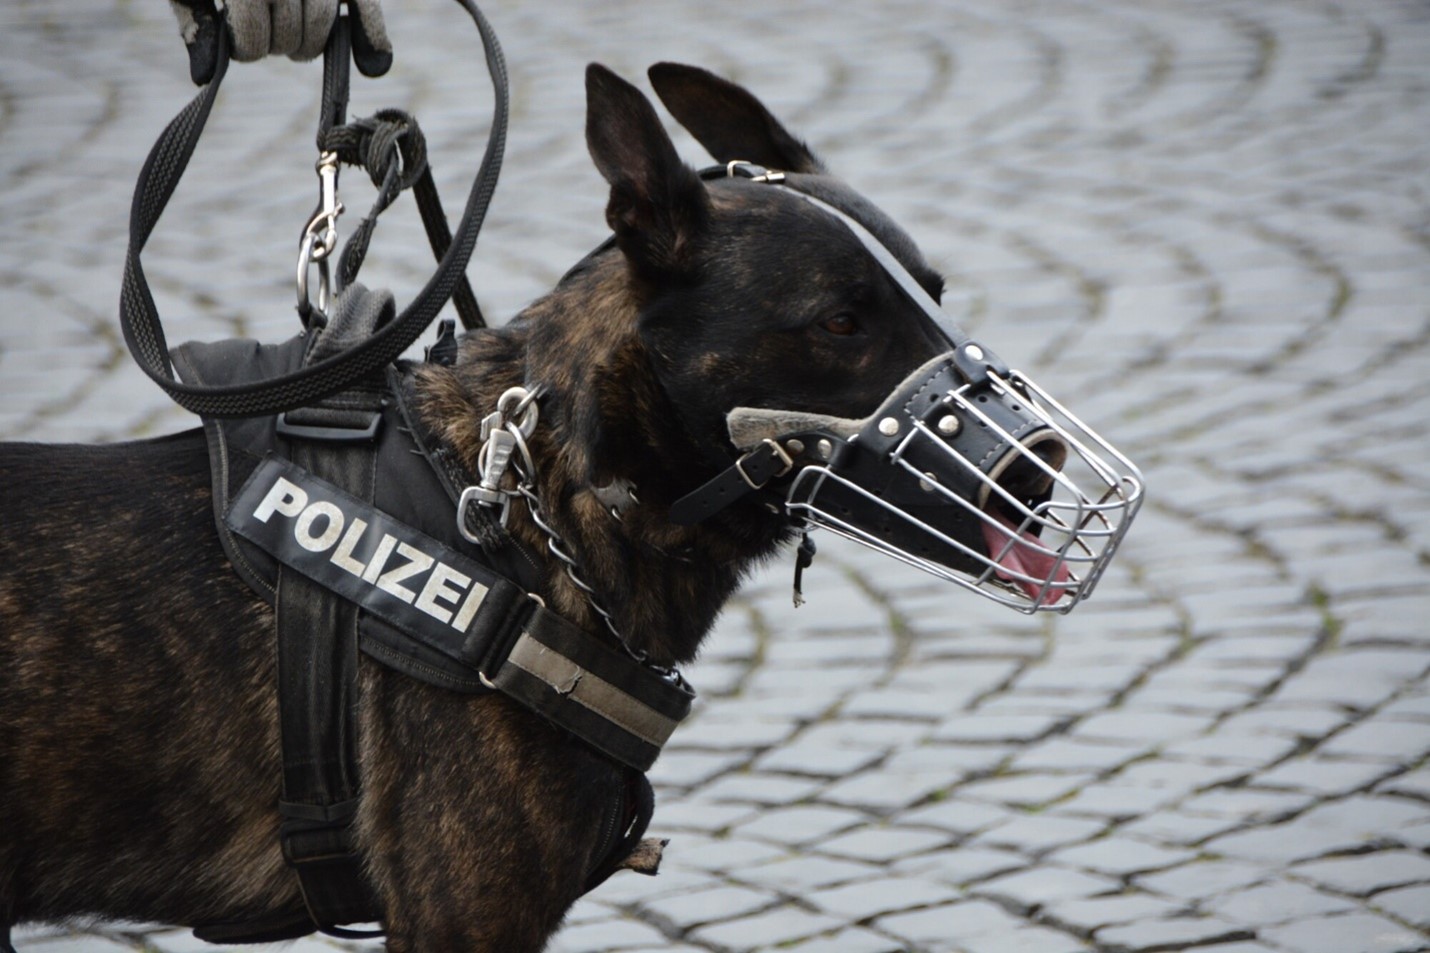 A Fine K-9: 5 Entertaining Facts About Police Dogs